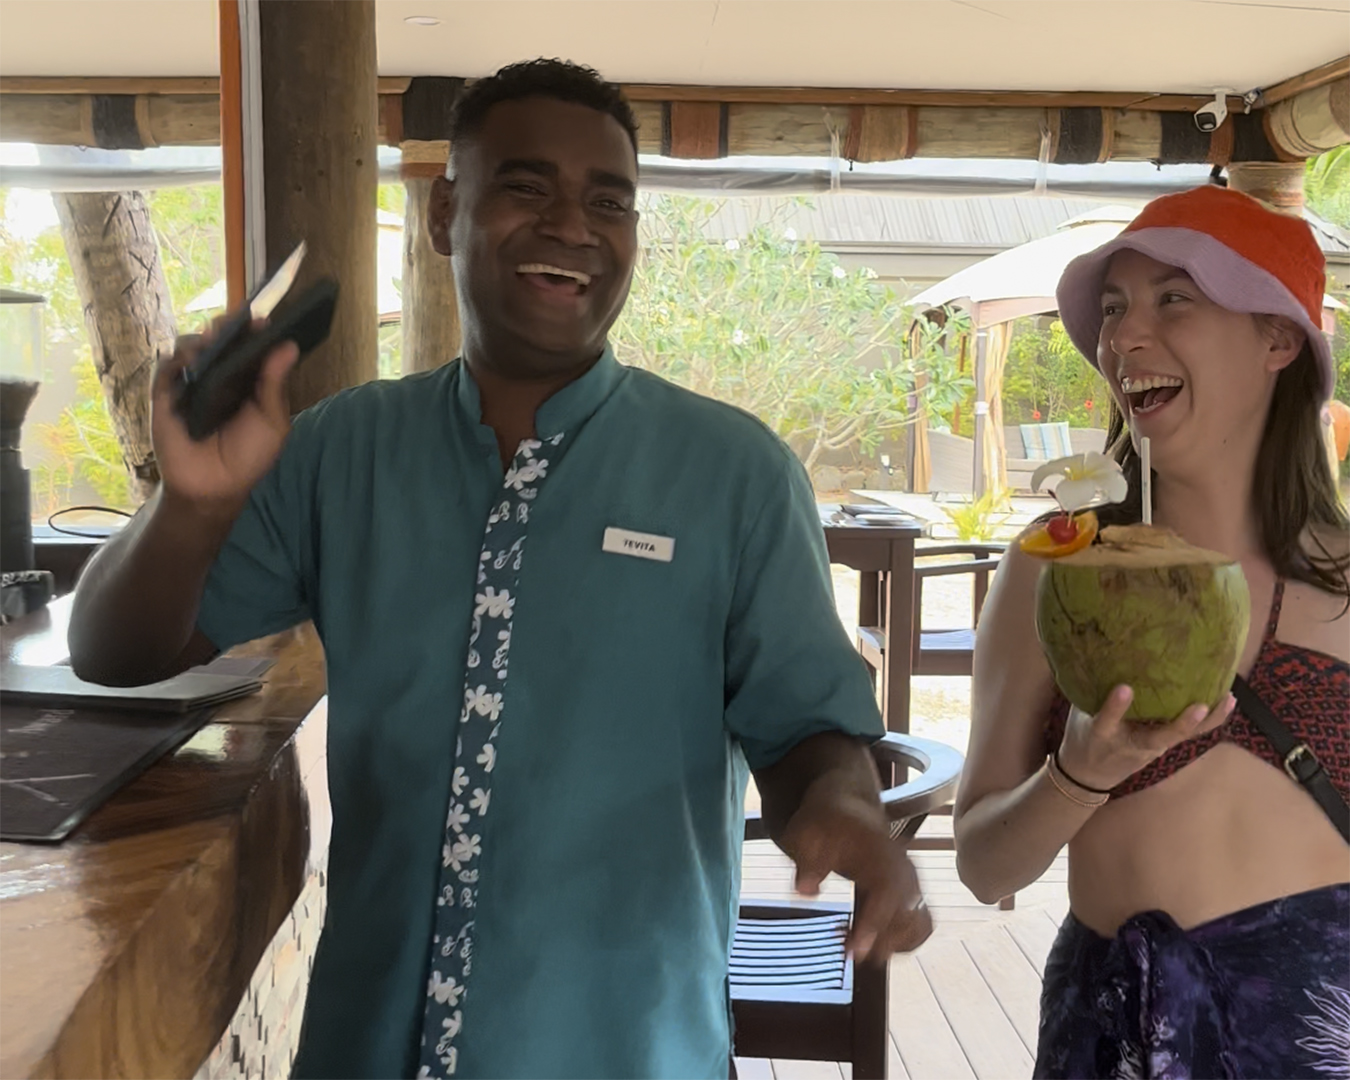 Laughing with the staff at Paradise Cove Resort while holding a fresh coconut